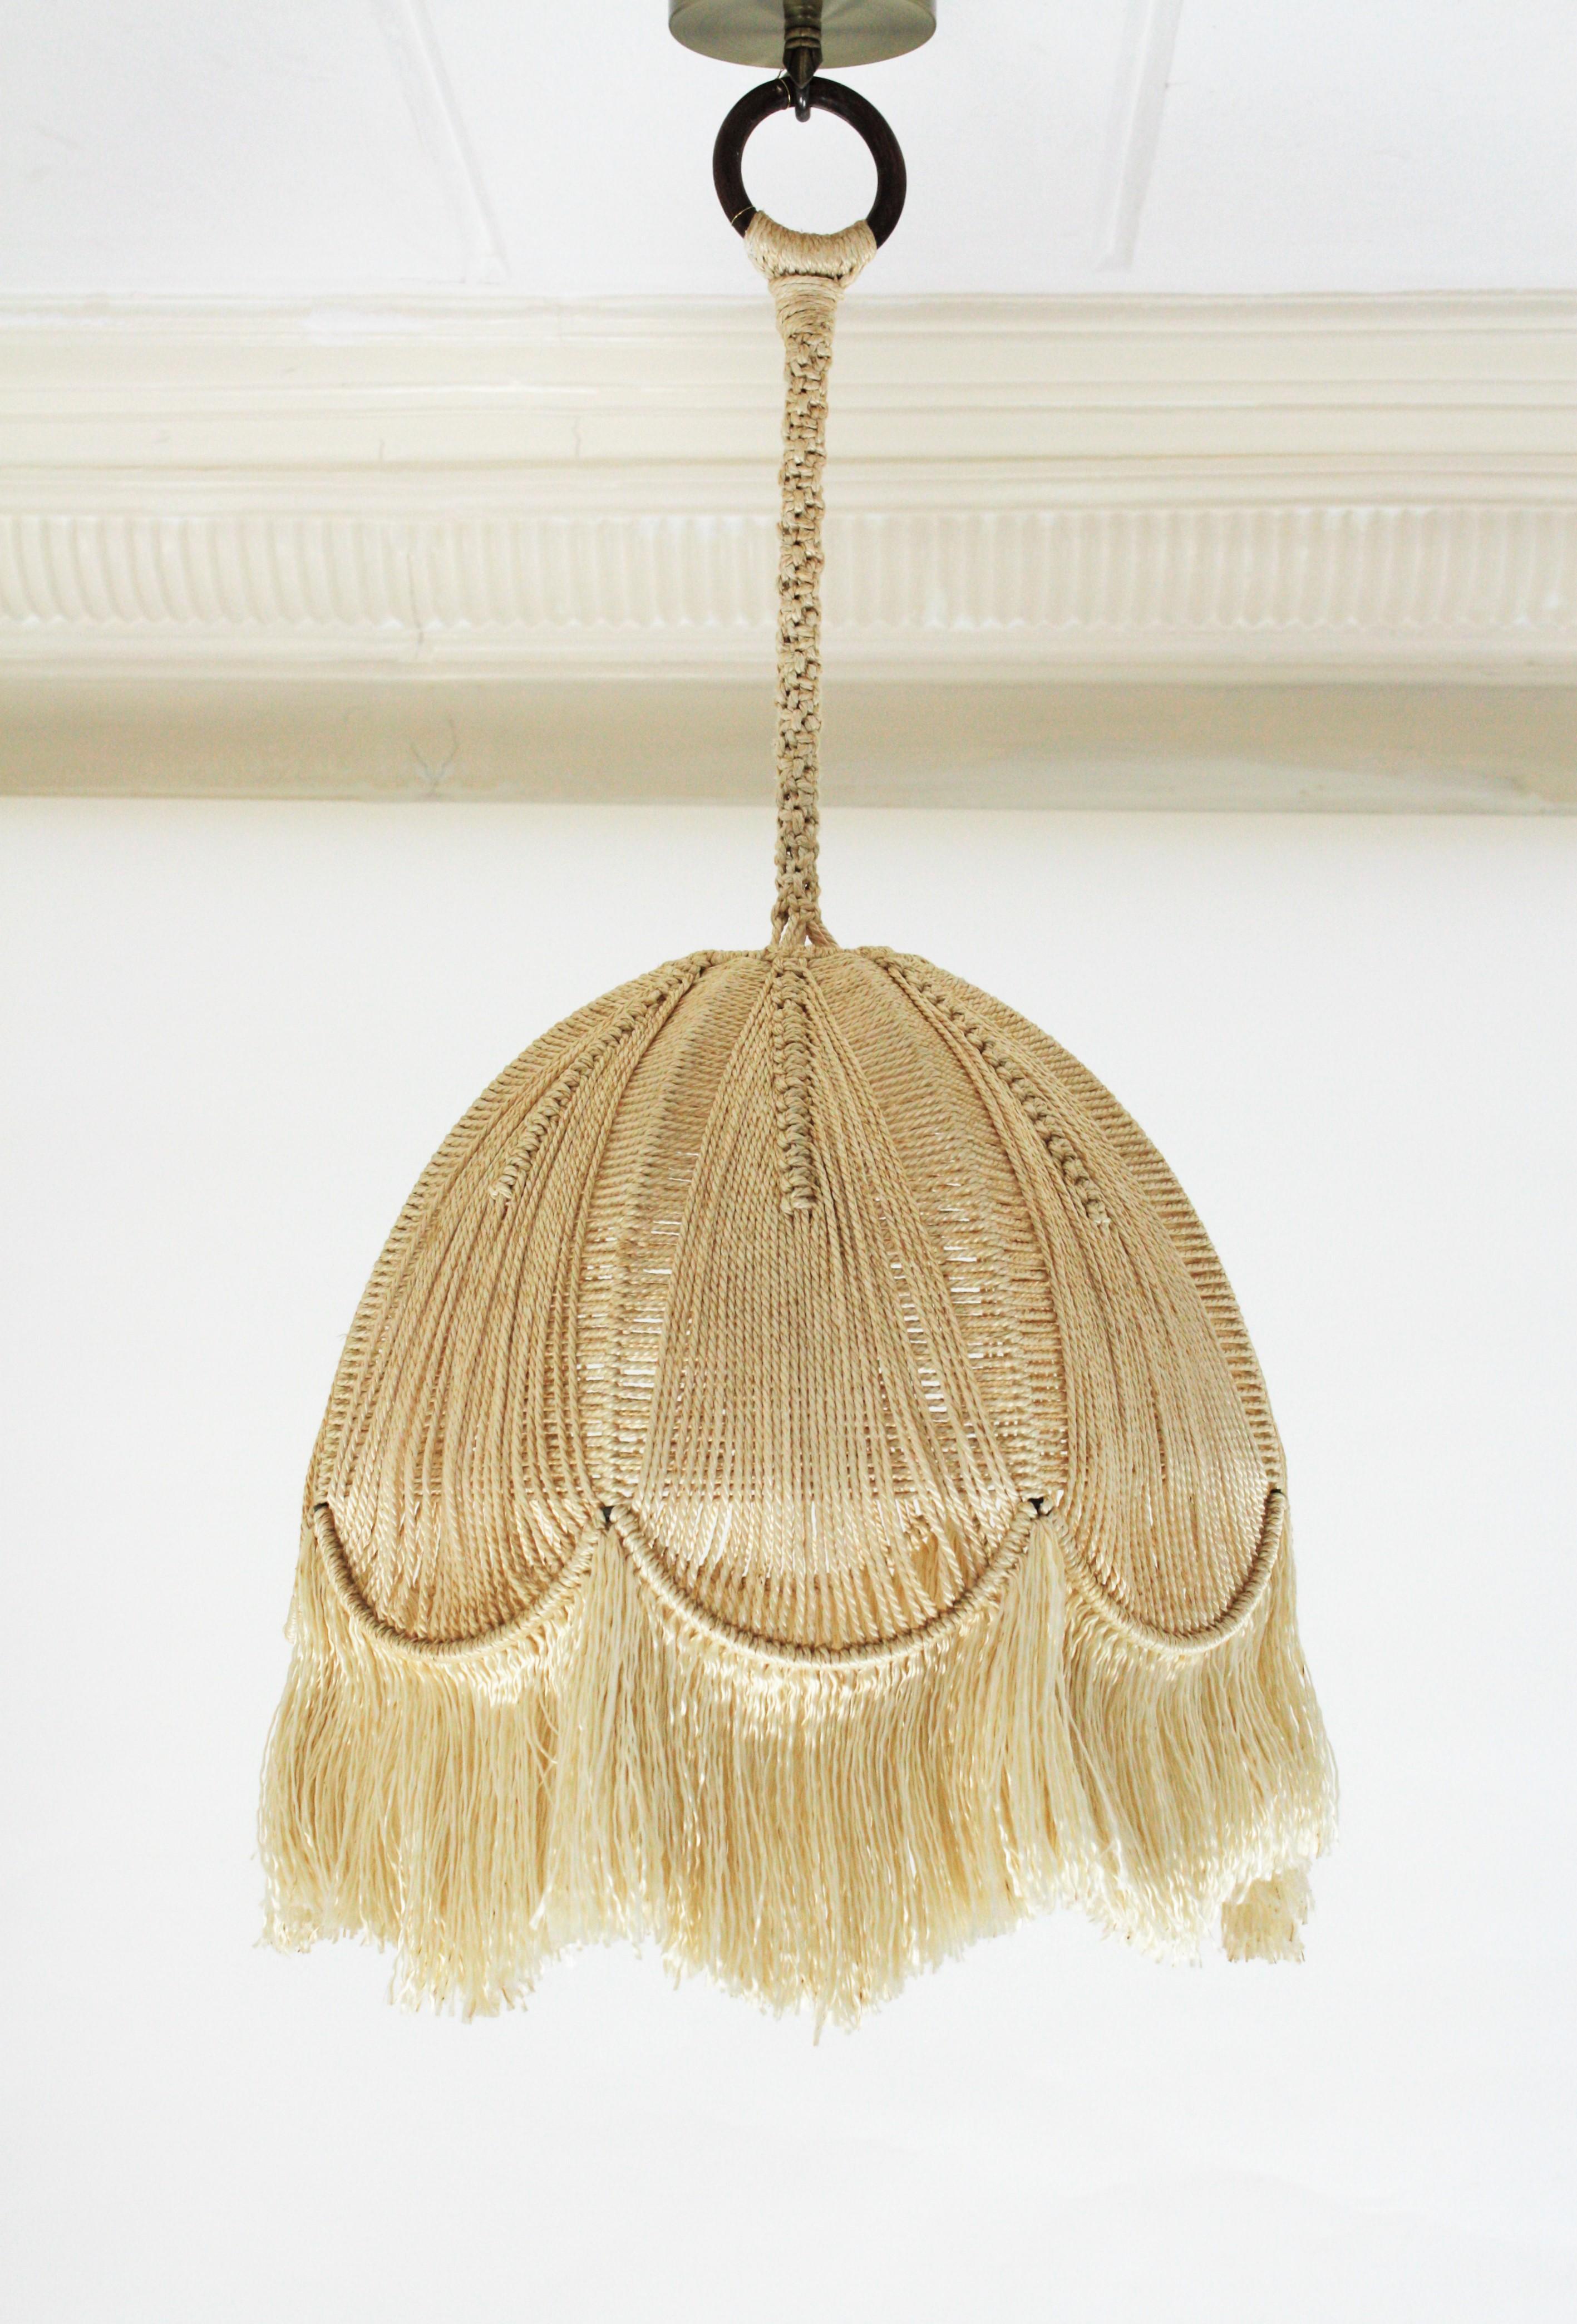 Lovely vintage original fiber macramé handcrafted bell shaped lantern / pendant, Spain, 1970s.
This eye-catching lamp features a bell shaped shade with hand braided and hand knotted macramé cord finished with a fringe at the bottom. It hangs from a